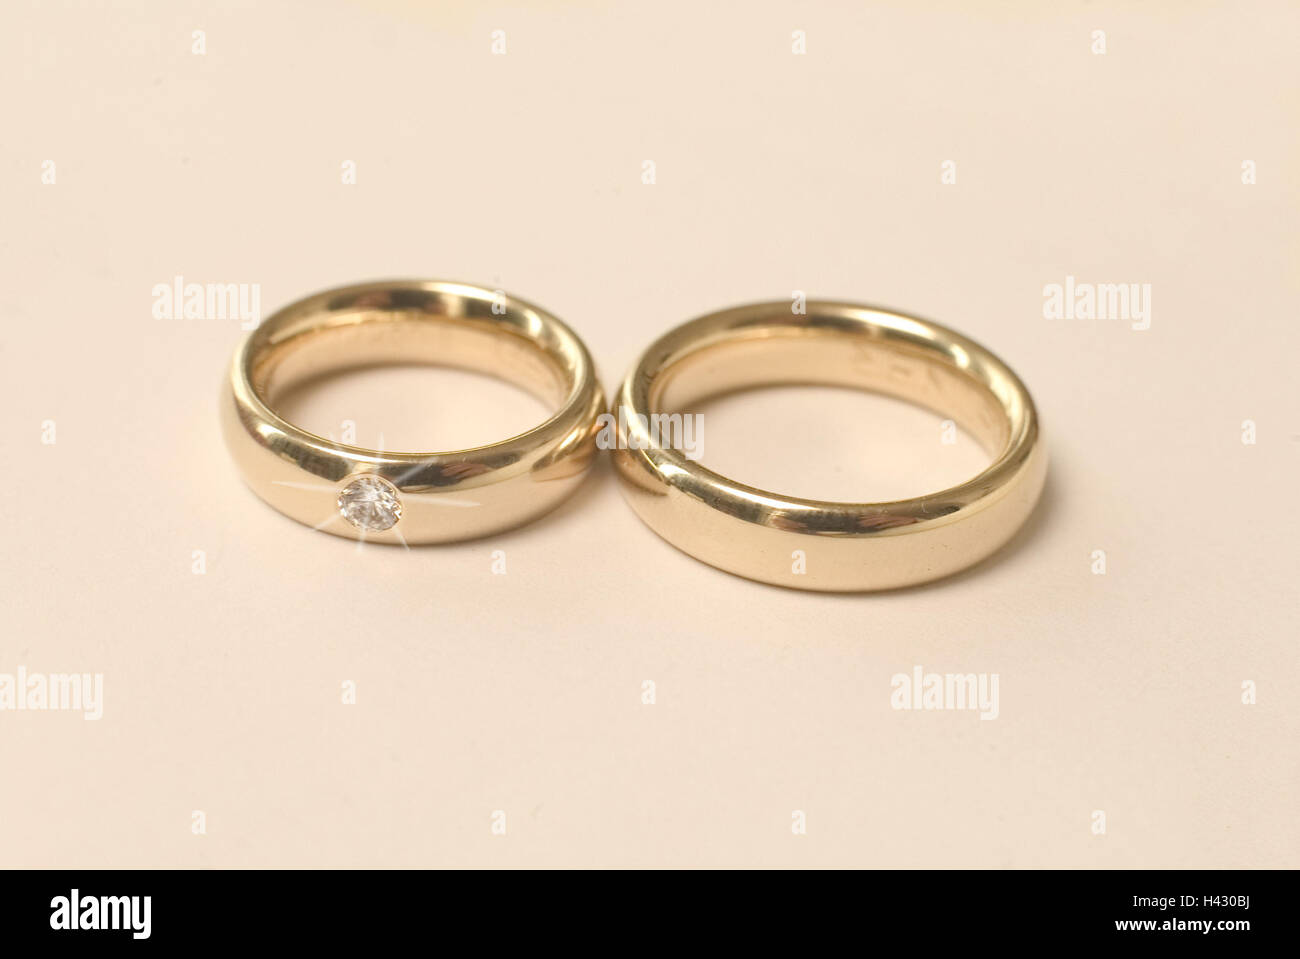 Soon Inge   Rings, wedding rings, gold, golden, gold rings, wedding, symbol, wedding, marriage, marriage, solidarity, marriage promises, marriage, partnership, jewelry, love, fidelity, quietly life, fact reception Stock Photo